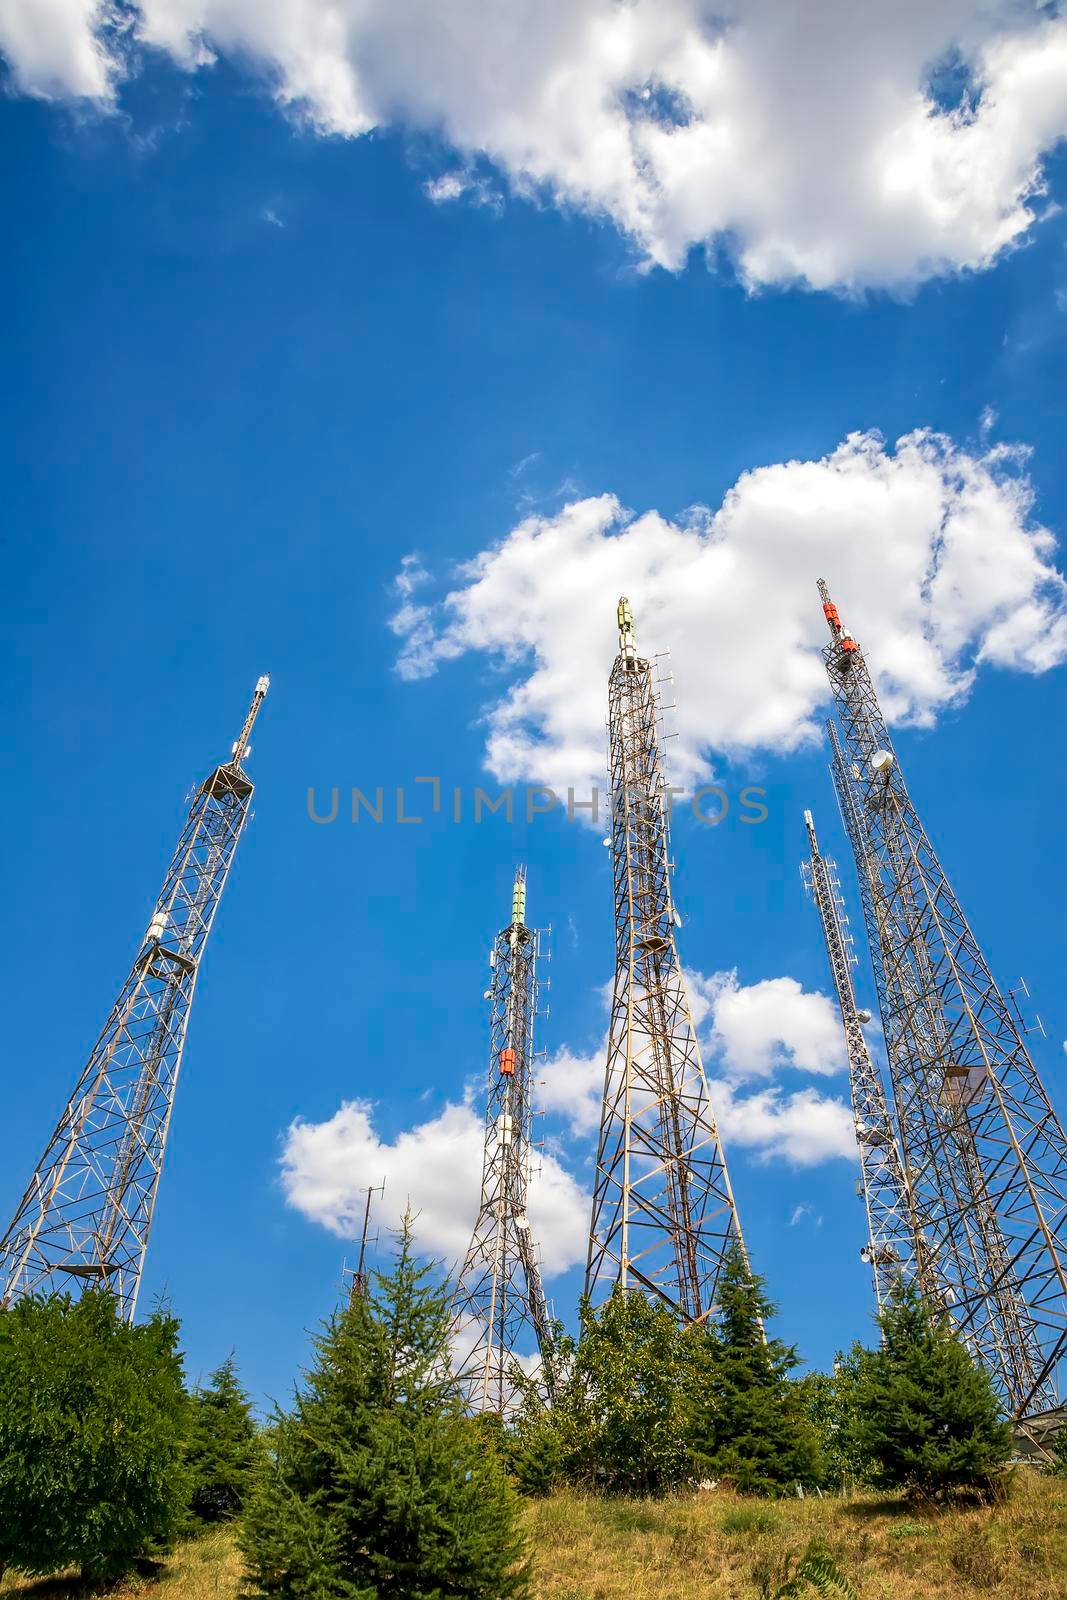 communication towers with control devices and antennas, transmitters and repeaters for mobile communications  by EdVal